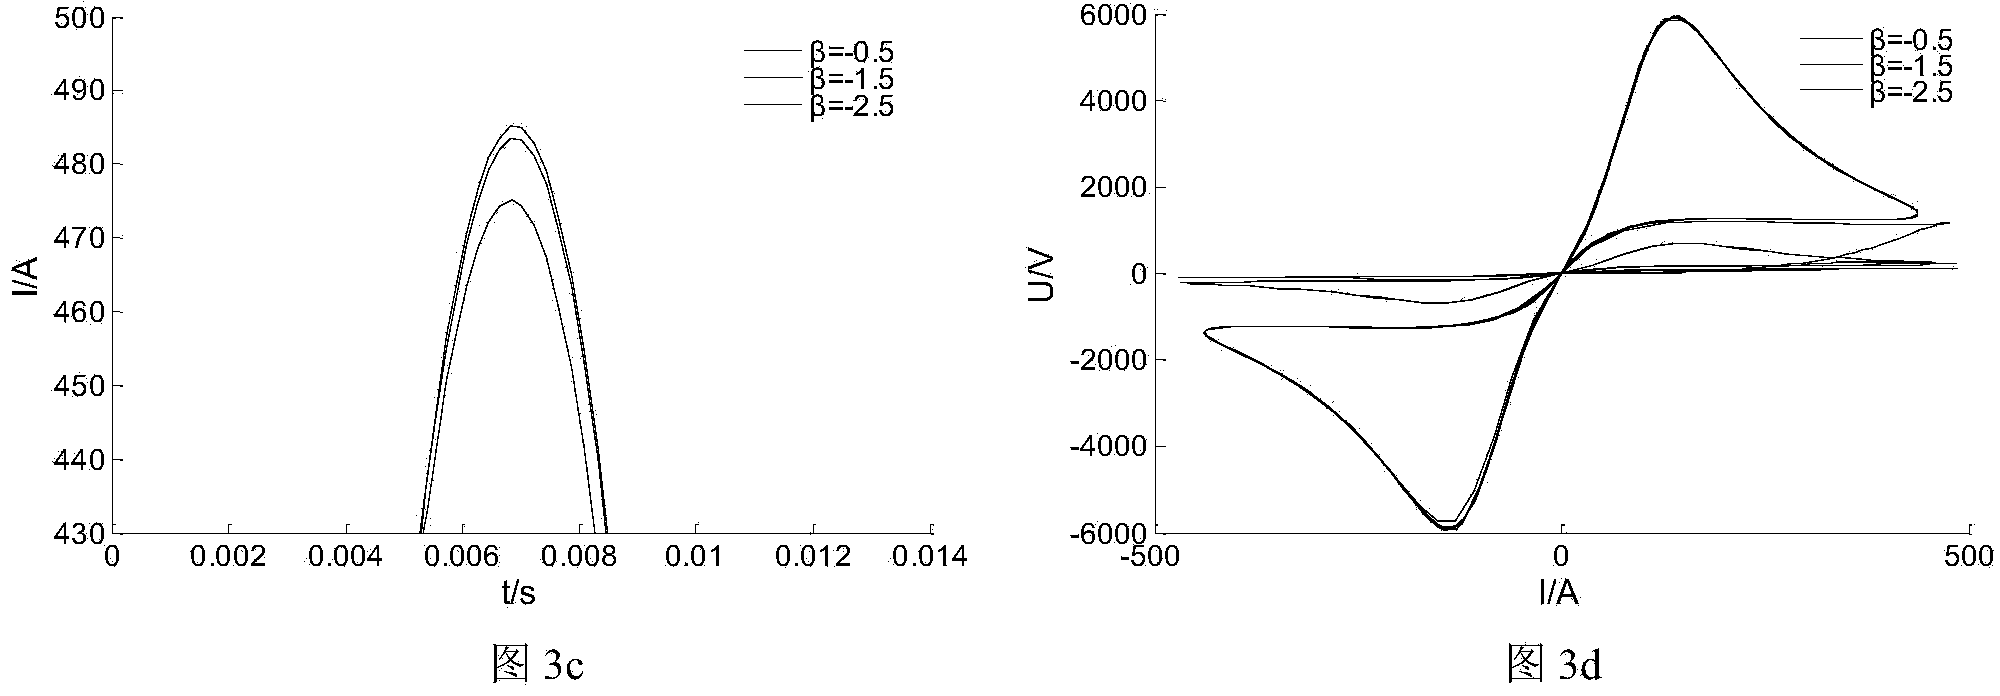 Arc net off-line electric arc mathematical model for calculating train speed